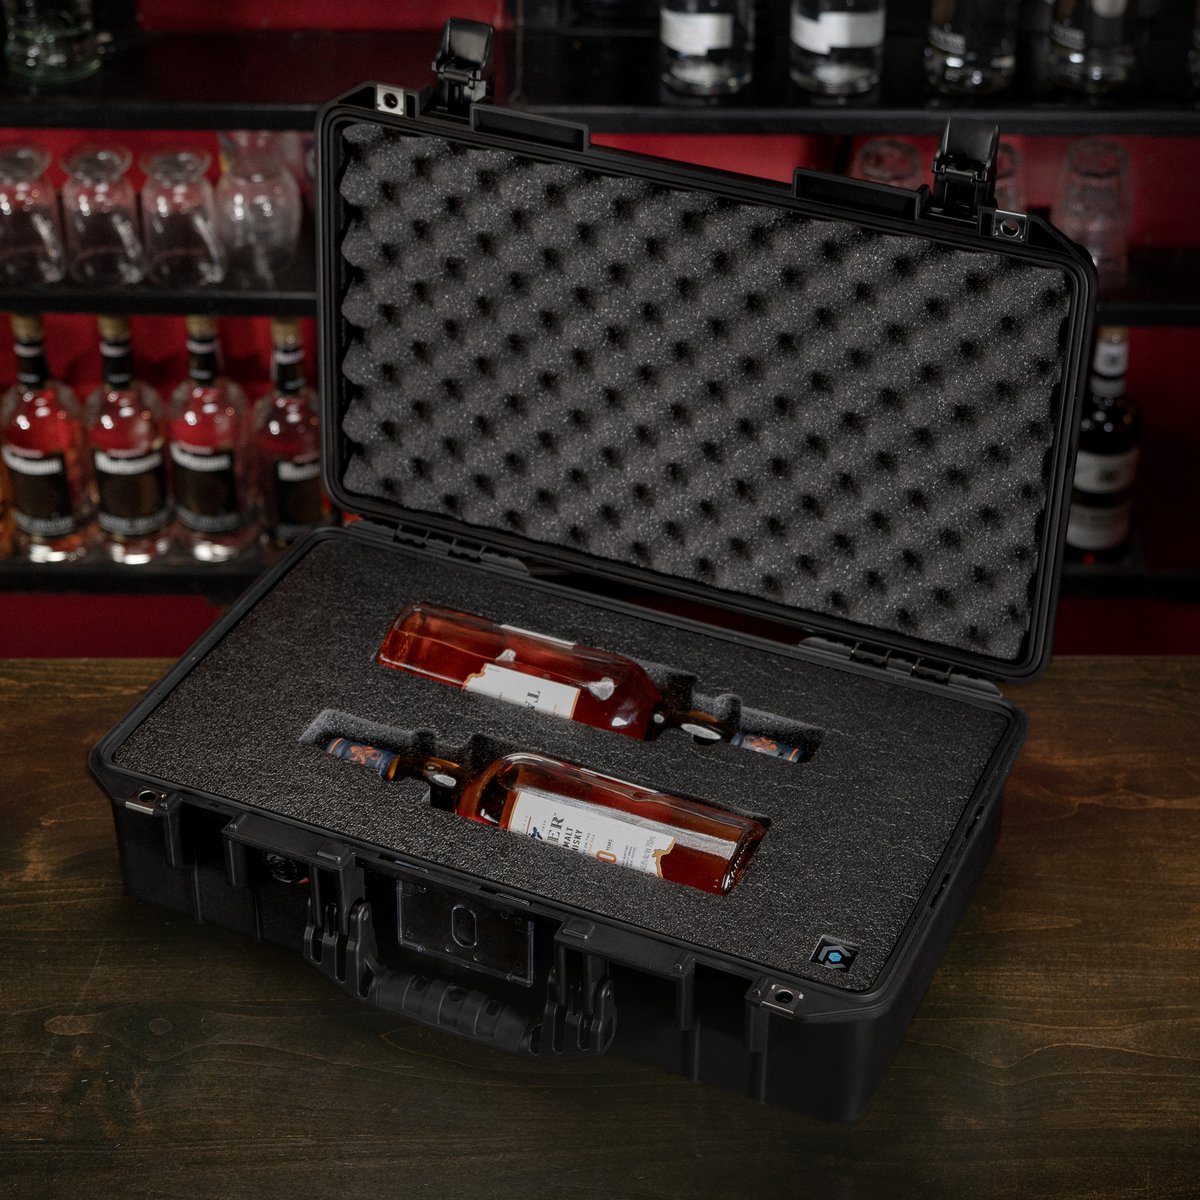 Spirited protection. Introducing the new Pelican Wine & Spirits Case by CasePro. Whether it's wine, whiskey, or beer, trust Pelican to keep your beverages safe and secure wherever your adventures take you. Available now on the site 🔗 #pelicanproducts #builttoprotect